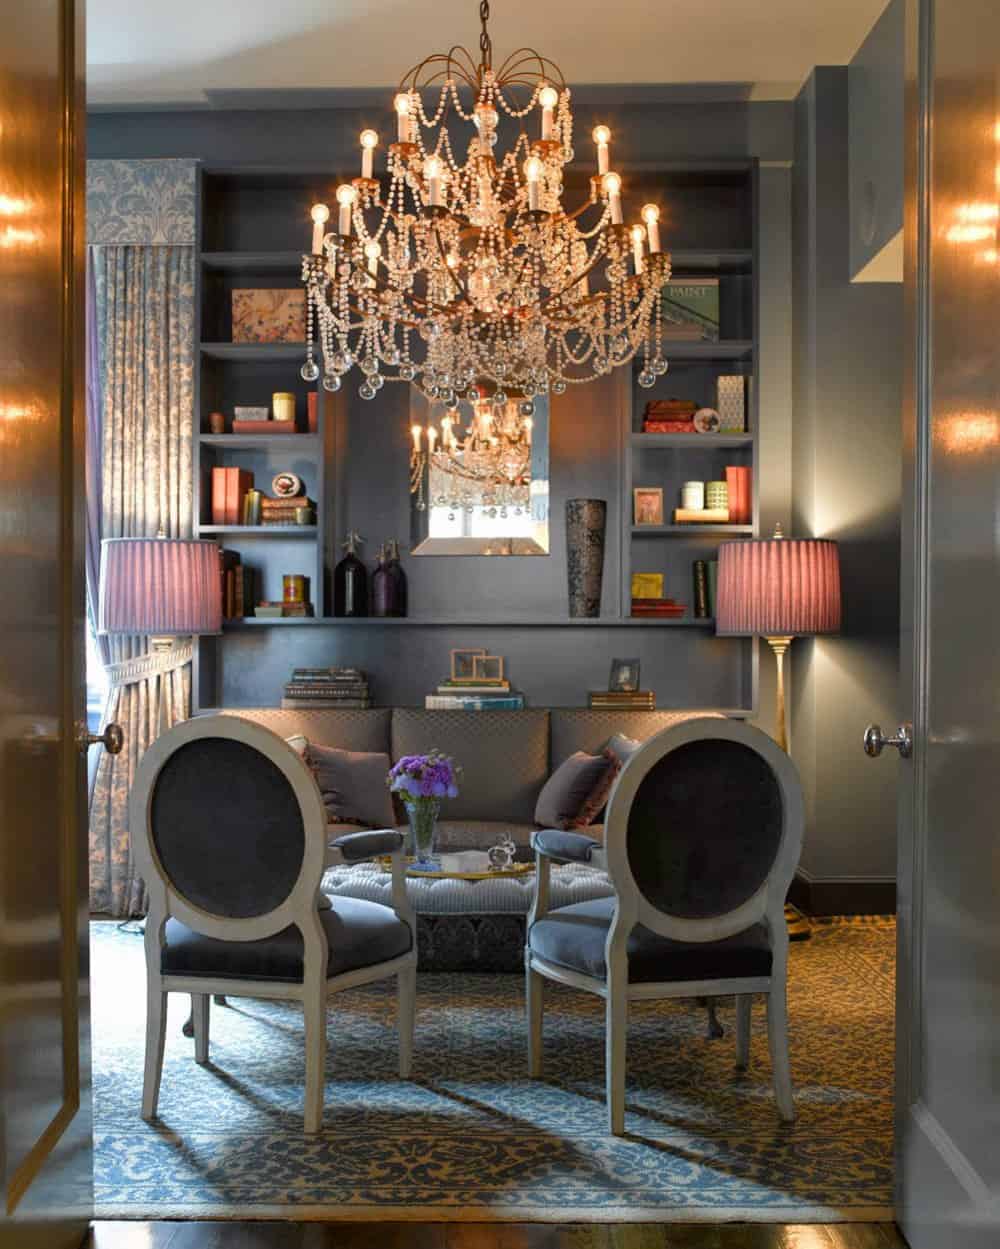 5-Crystal-Chandeliers-To-Elevate-Your-Interiors-cc